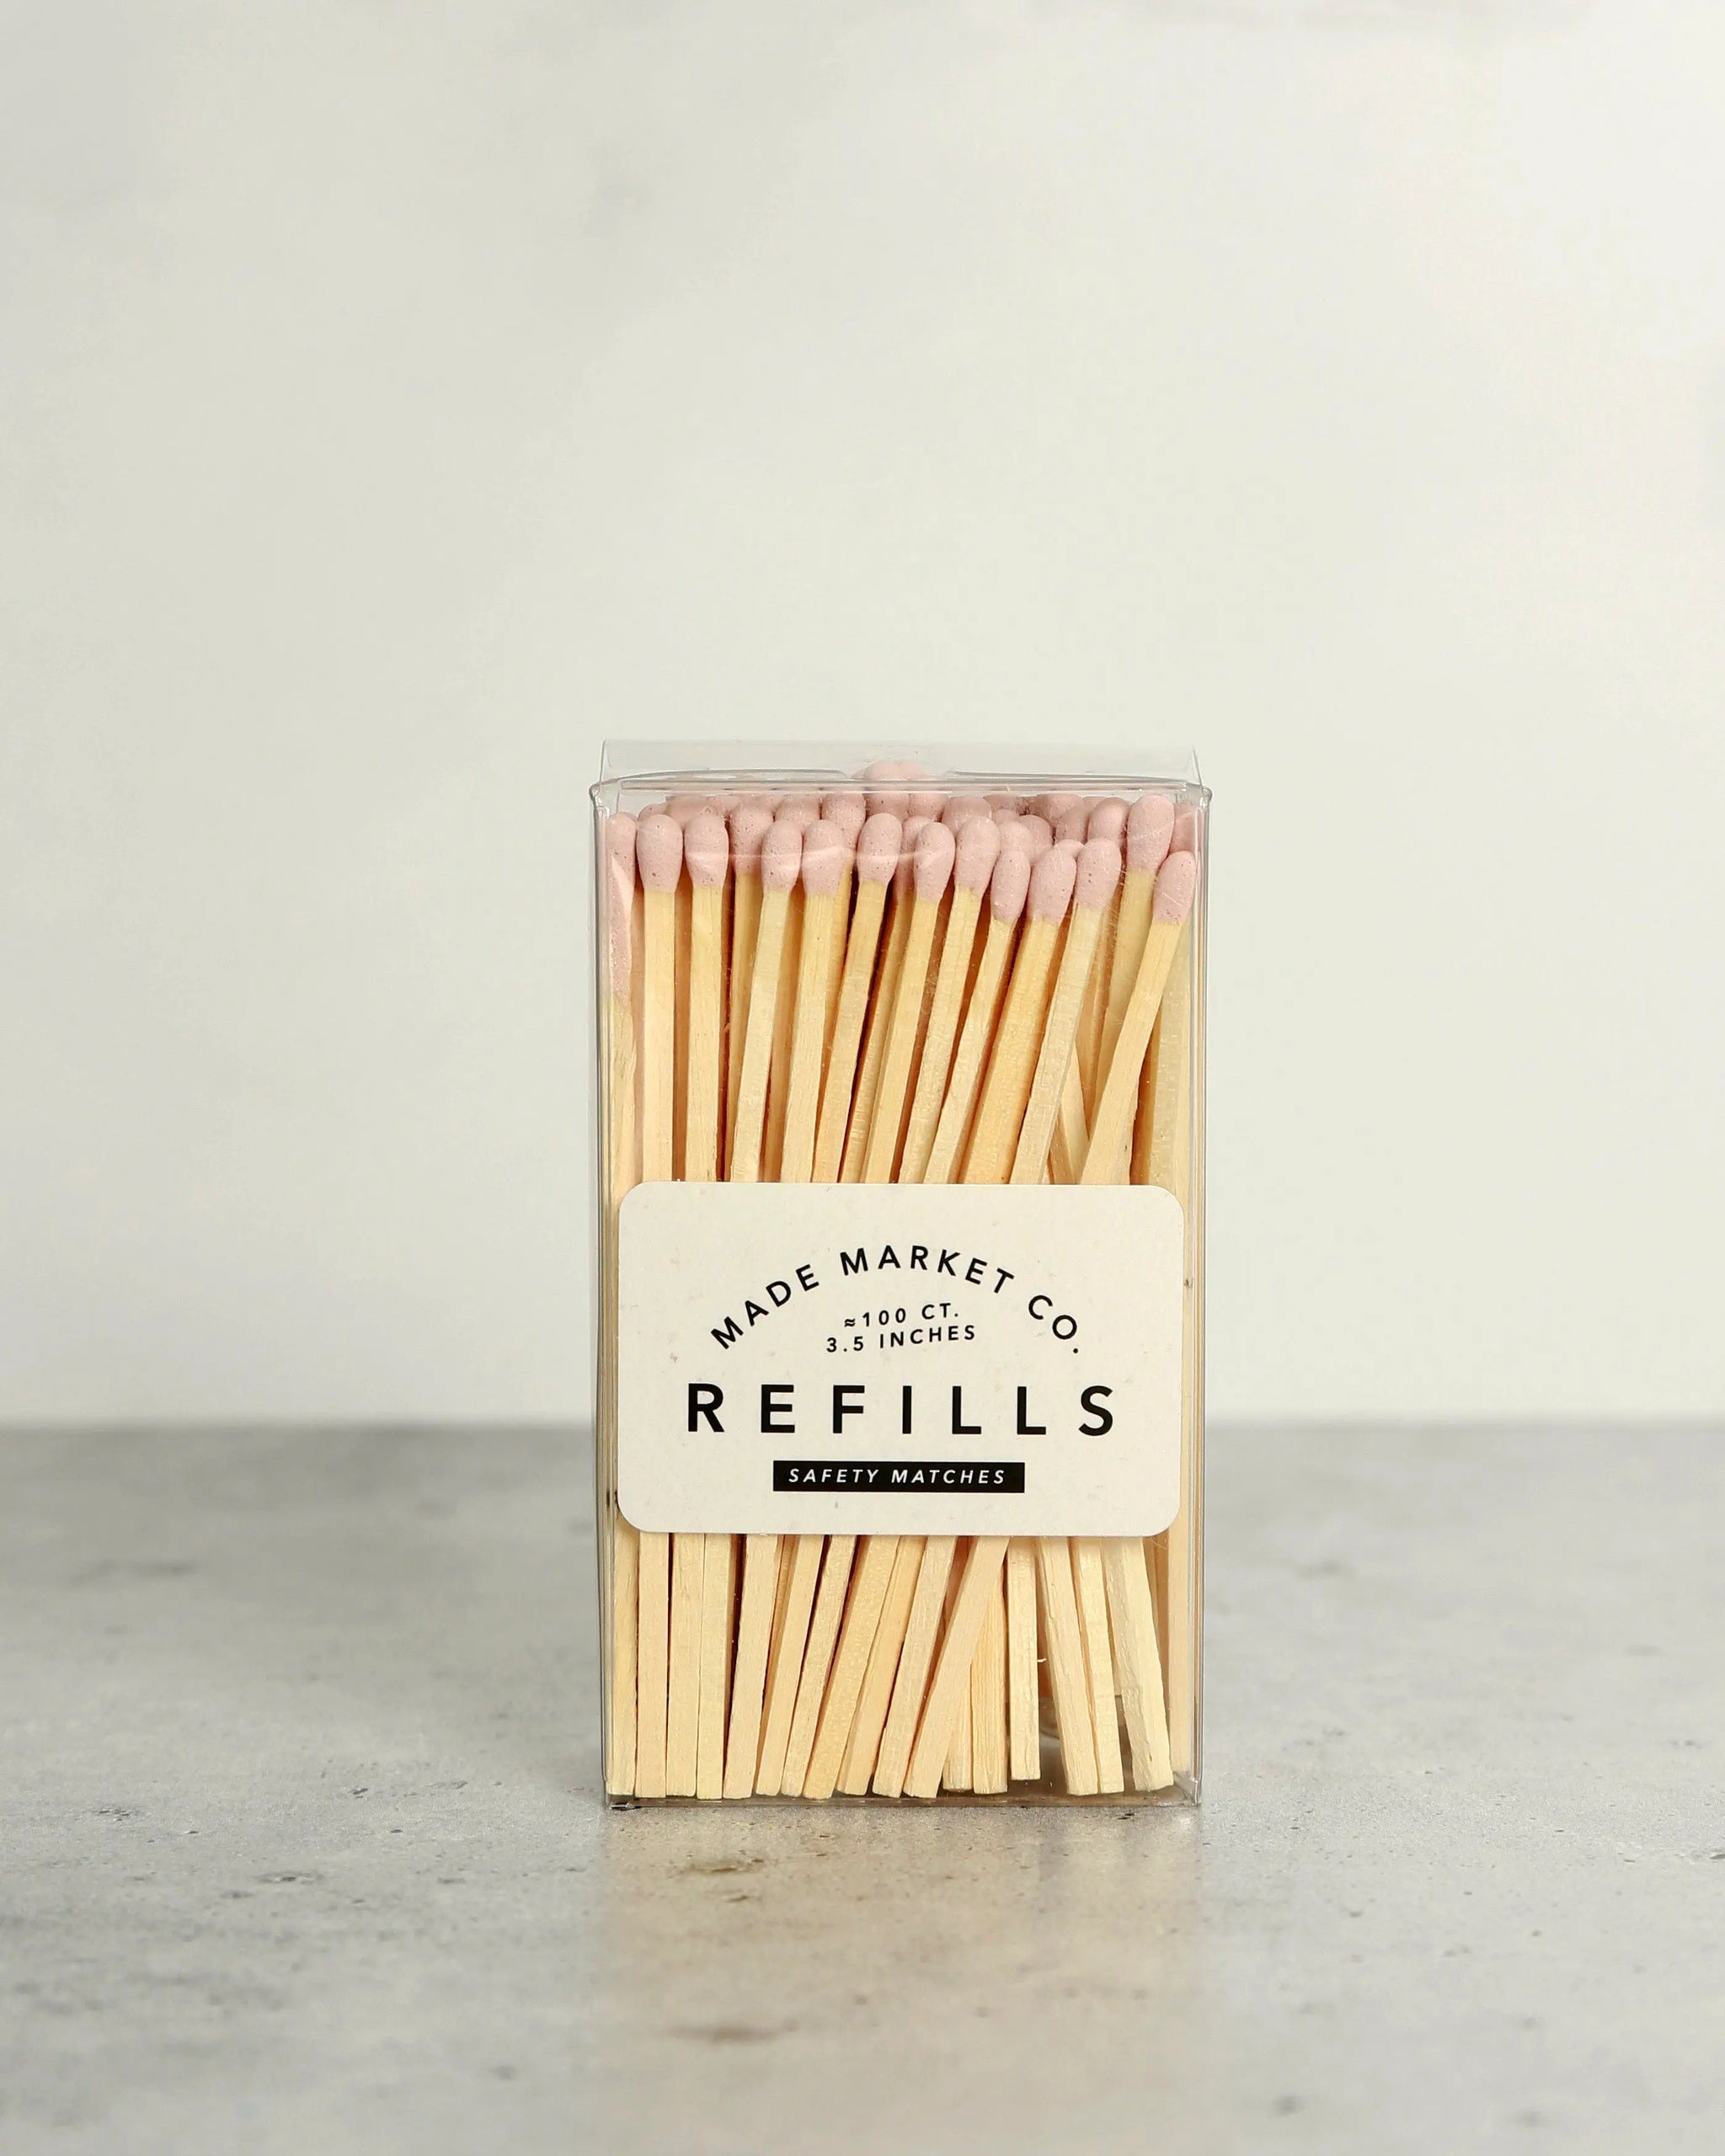  Made Market Co. Safety Matches Refills